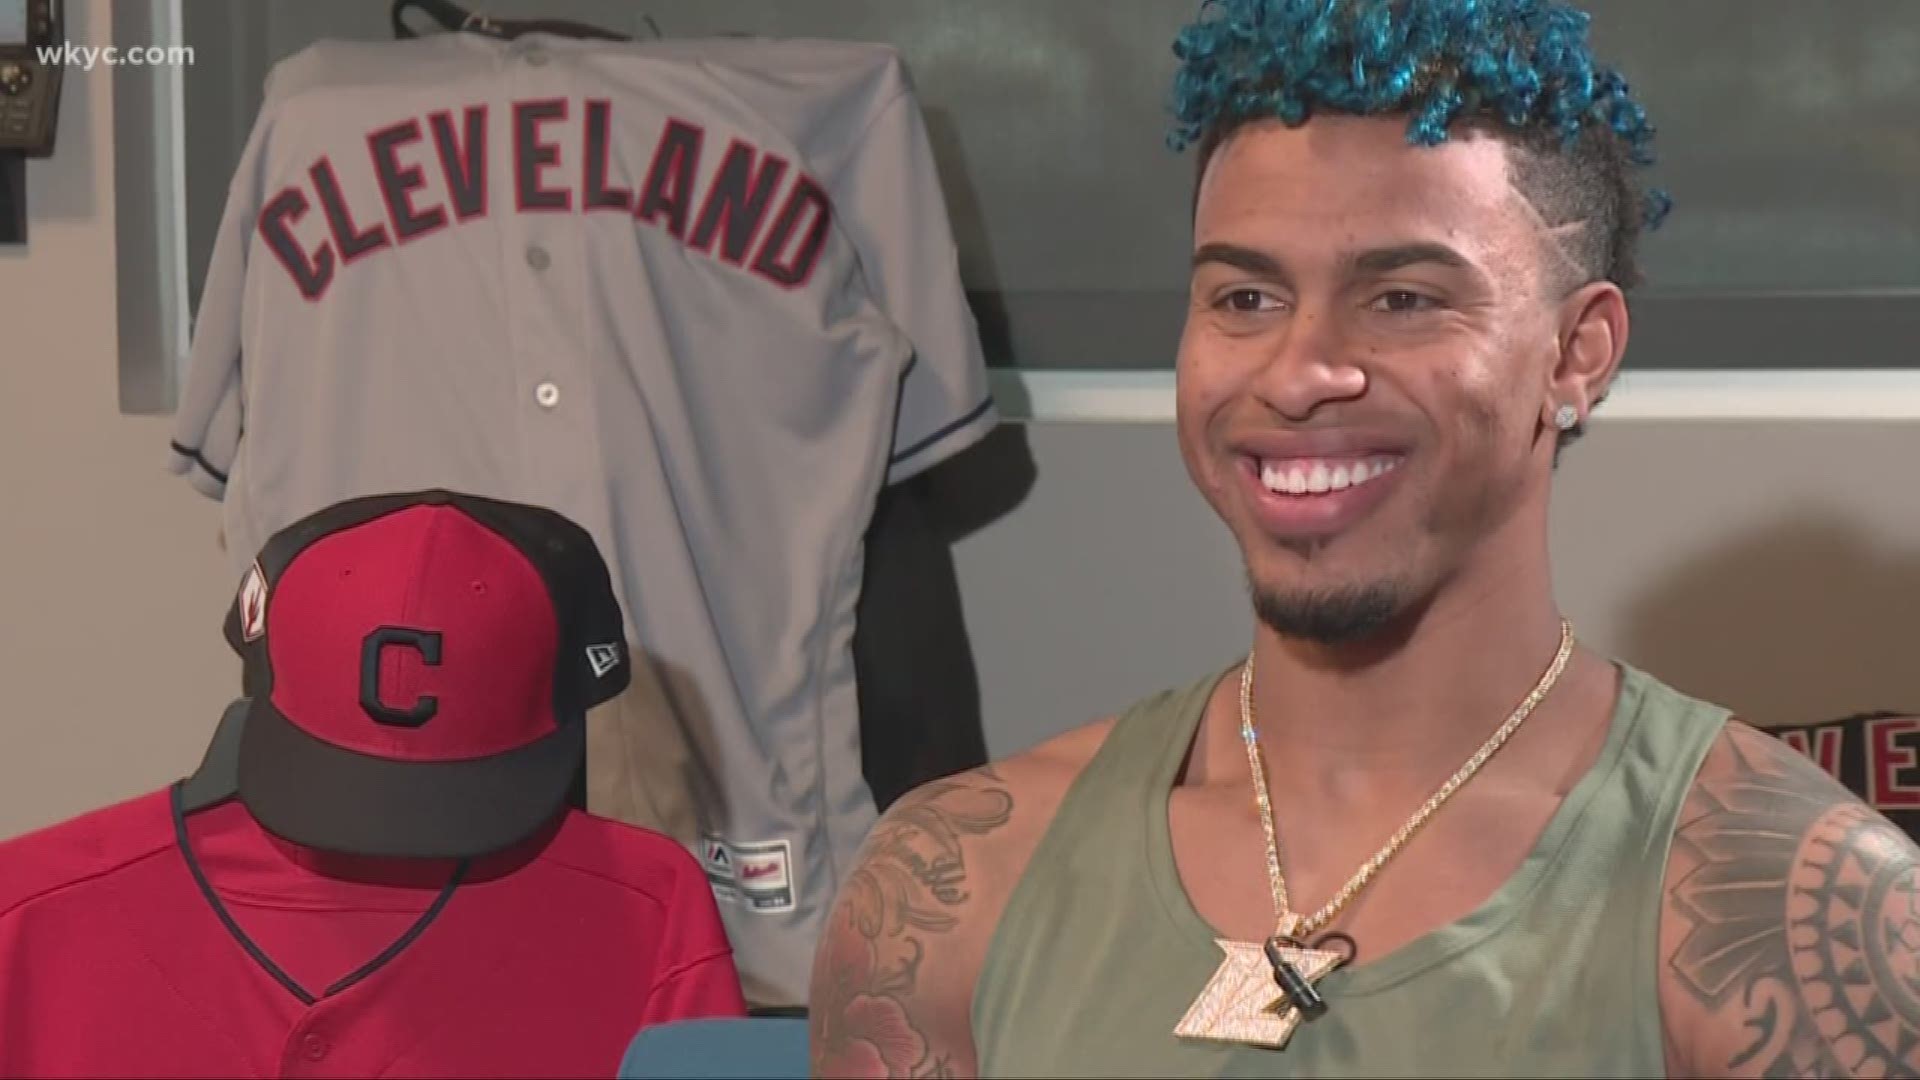 April 22, 2019: We sit down for a conversation with Francisco Lindor to see what his life is like outside of Cleveland Indians baseball.